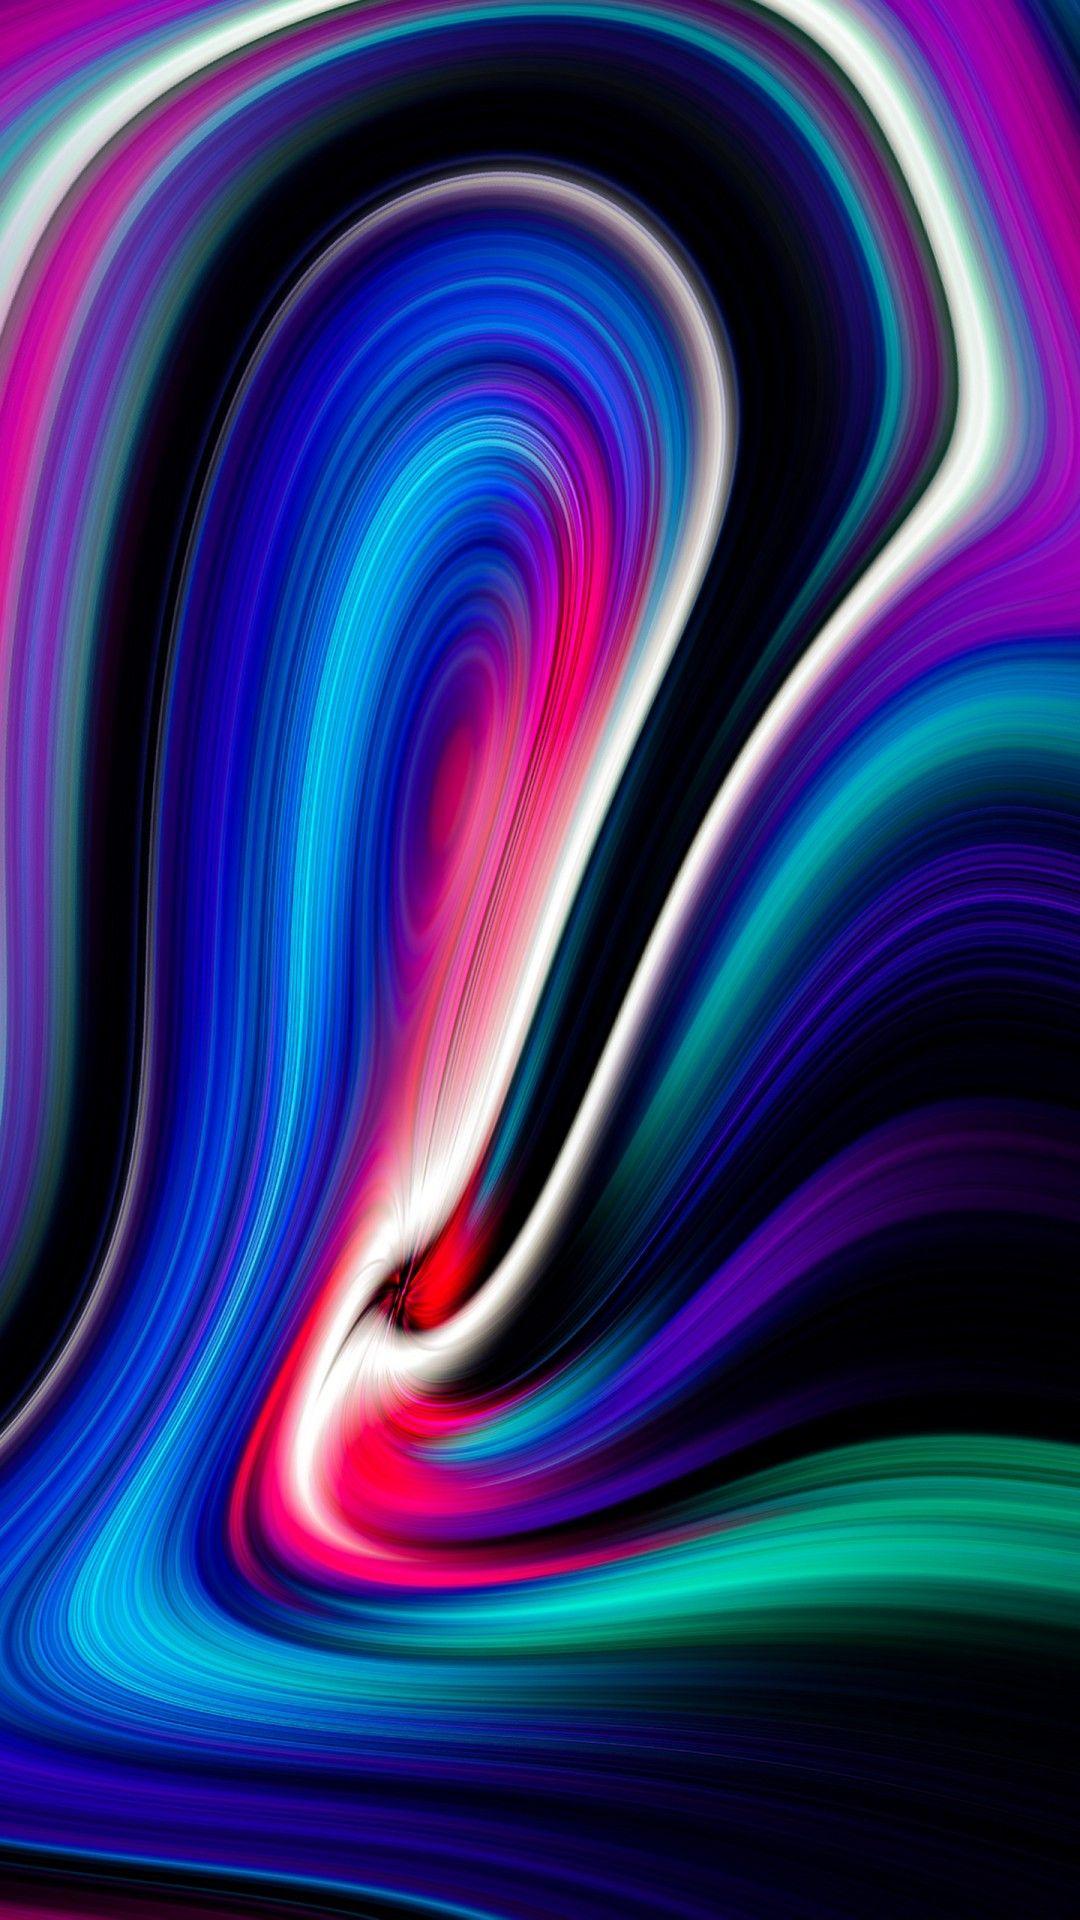 Abstract Swirl Phone Wallpapers - Top Free Abstract Swirl Phone ...